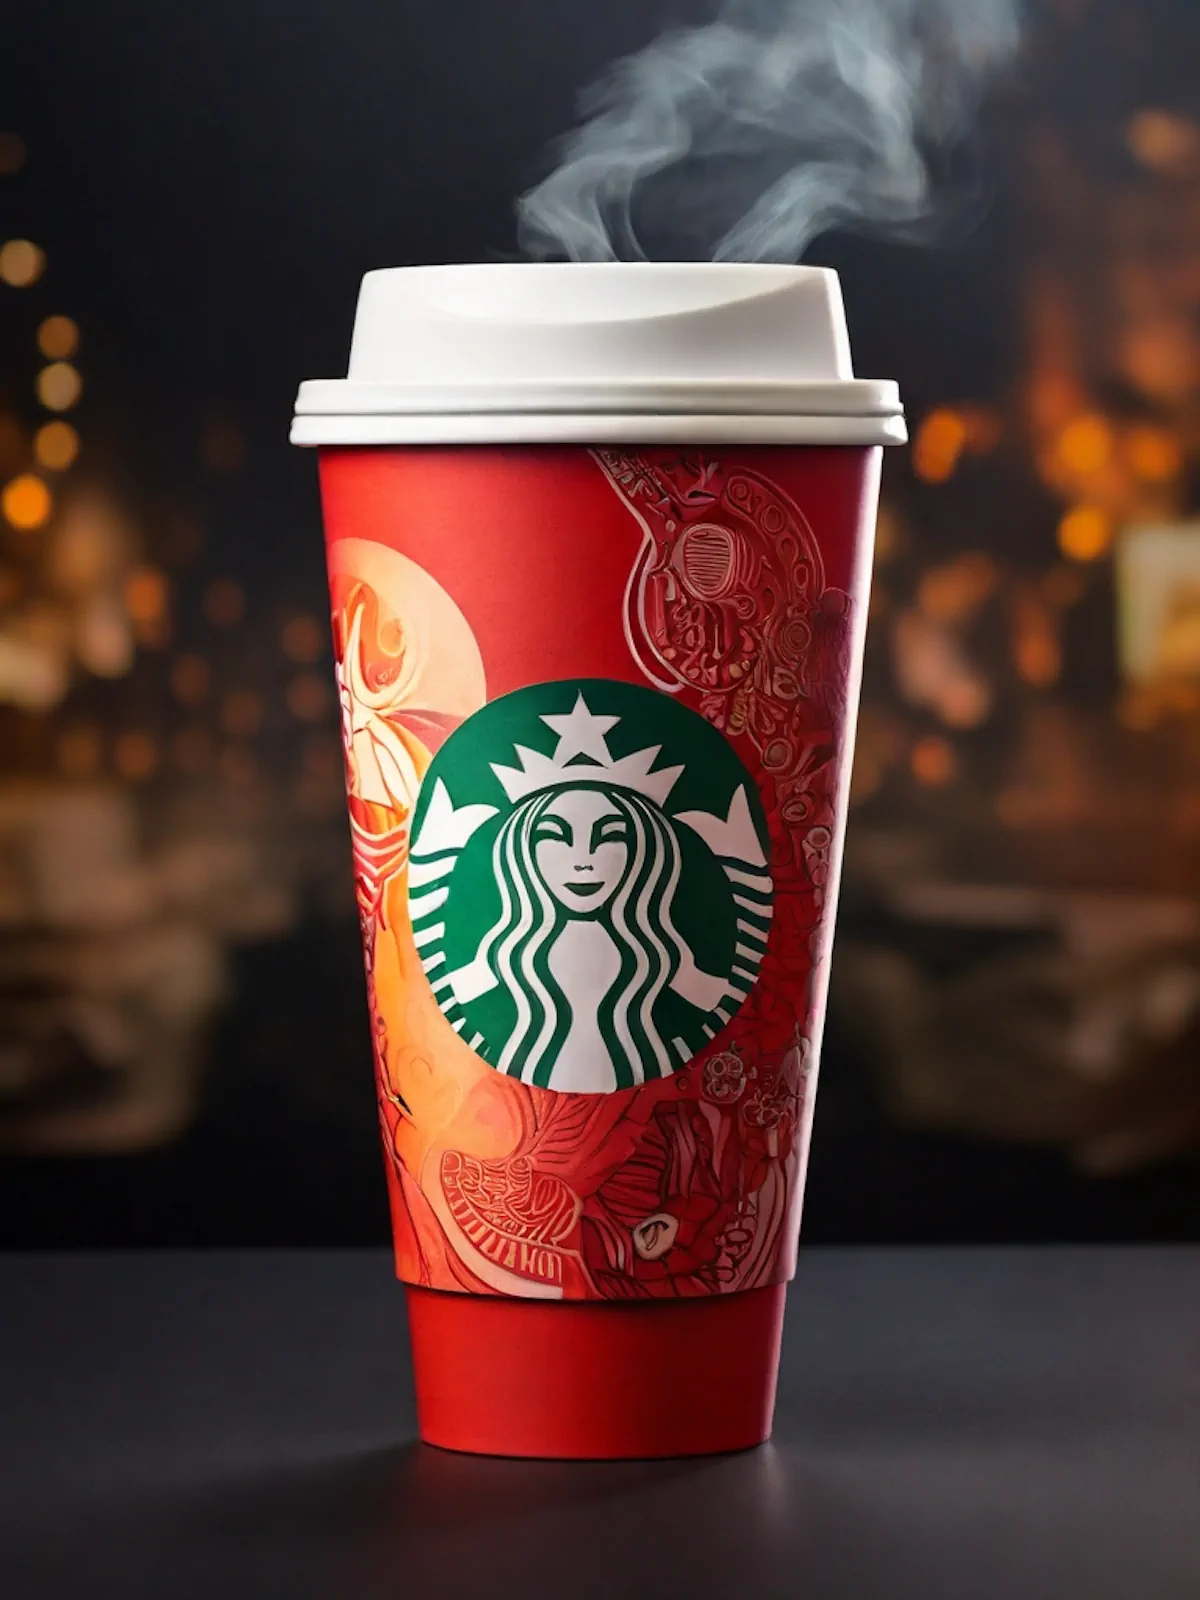 A red Starbucks takeaway cup with a steaming hot drink.